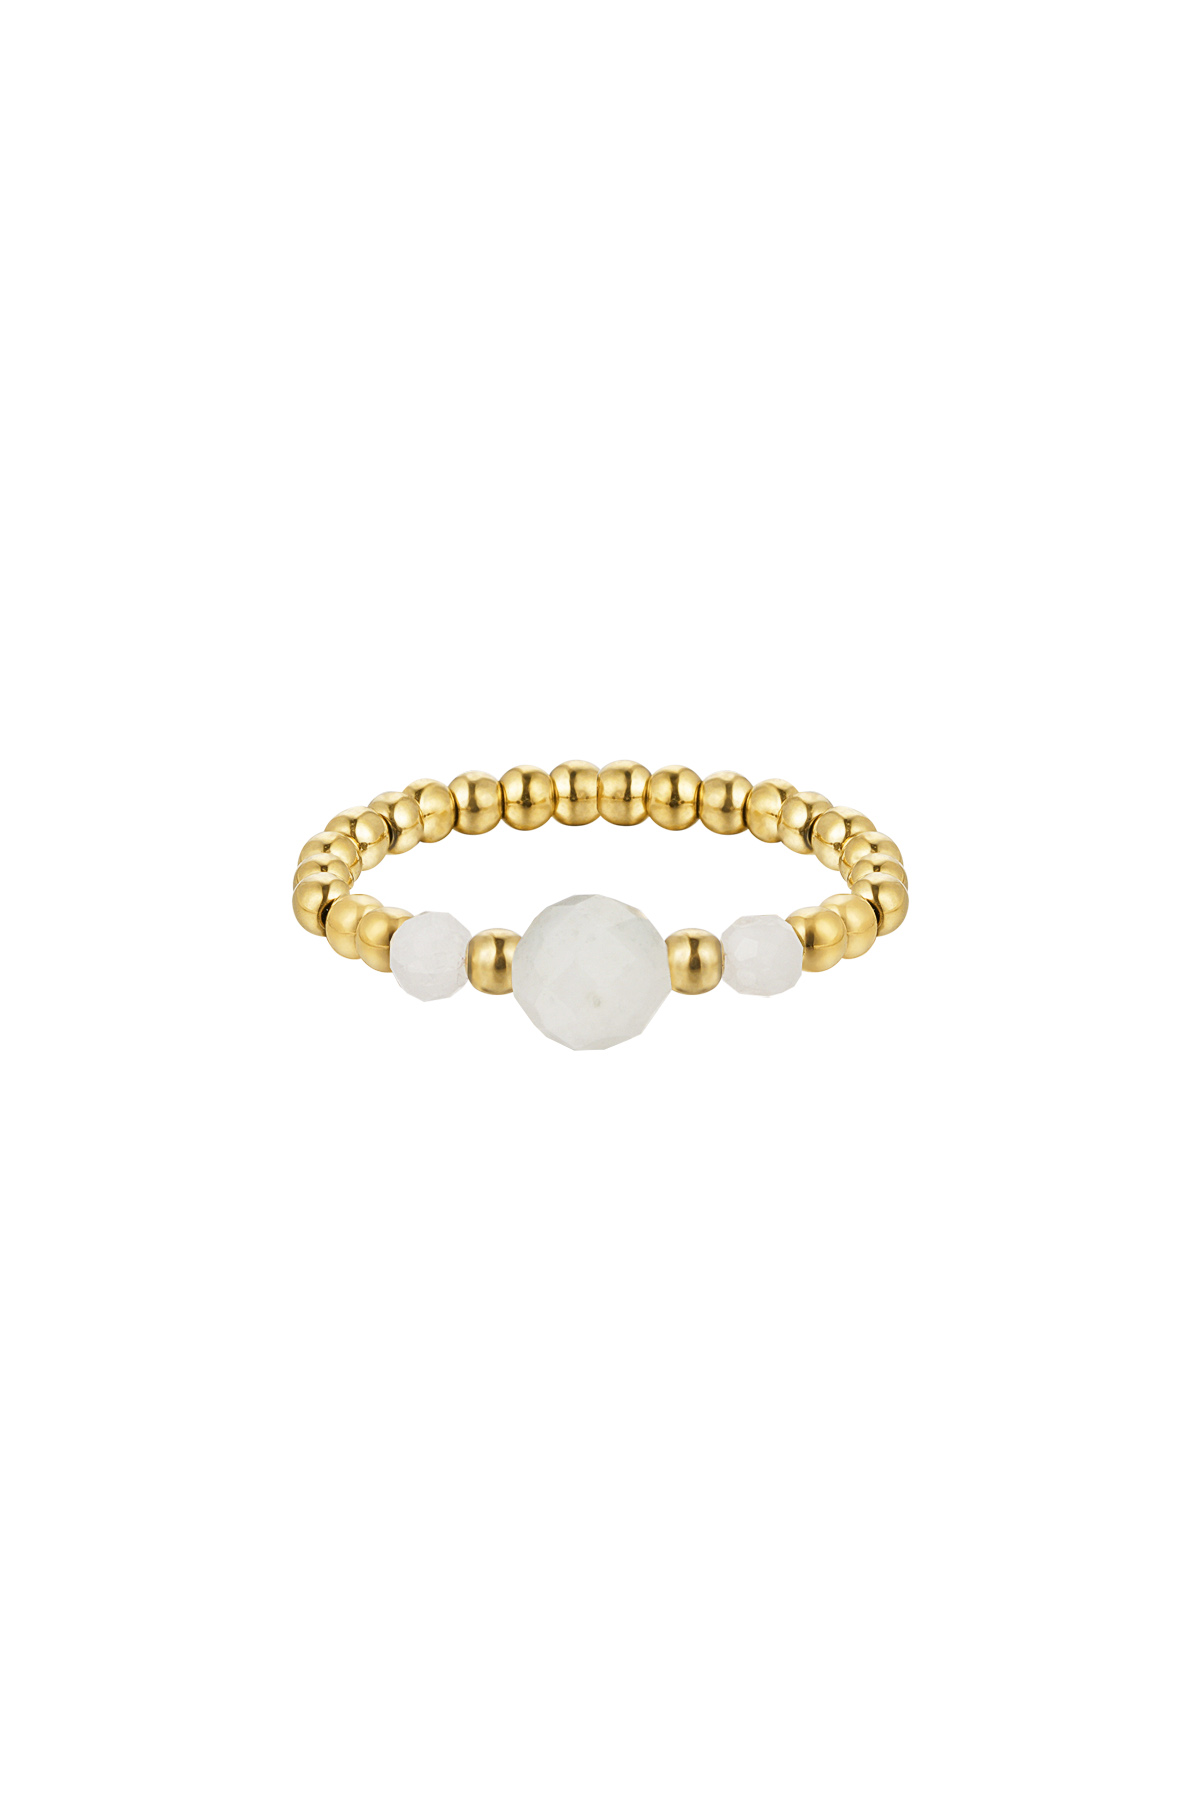 Ring small beads - Natural stone collection - gold/white White gold One size 